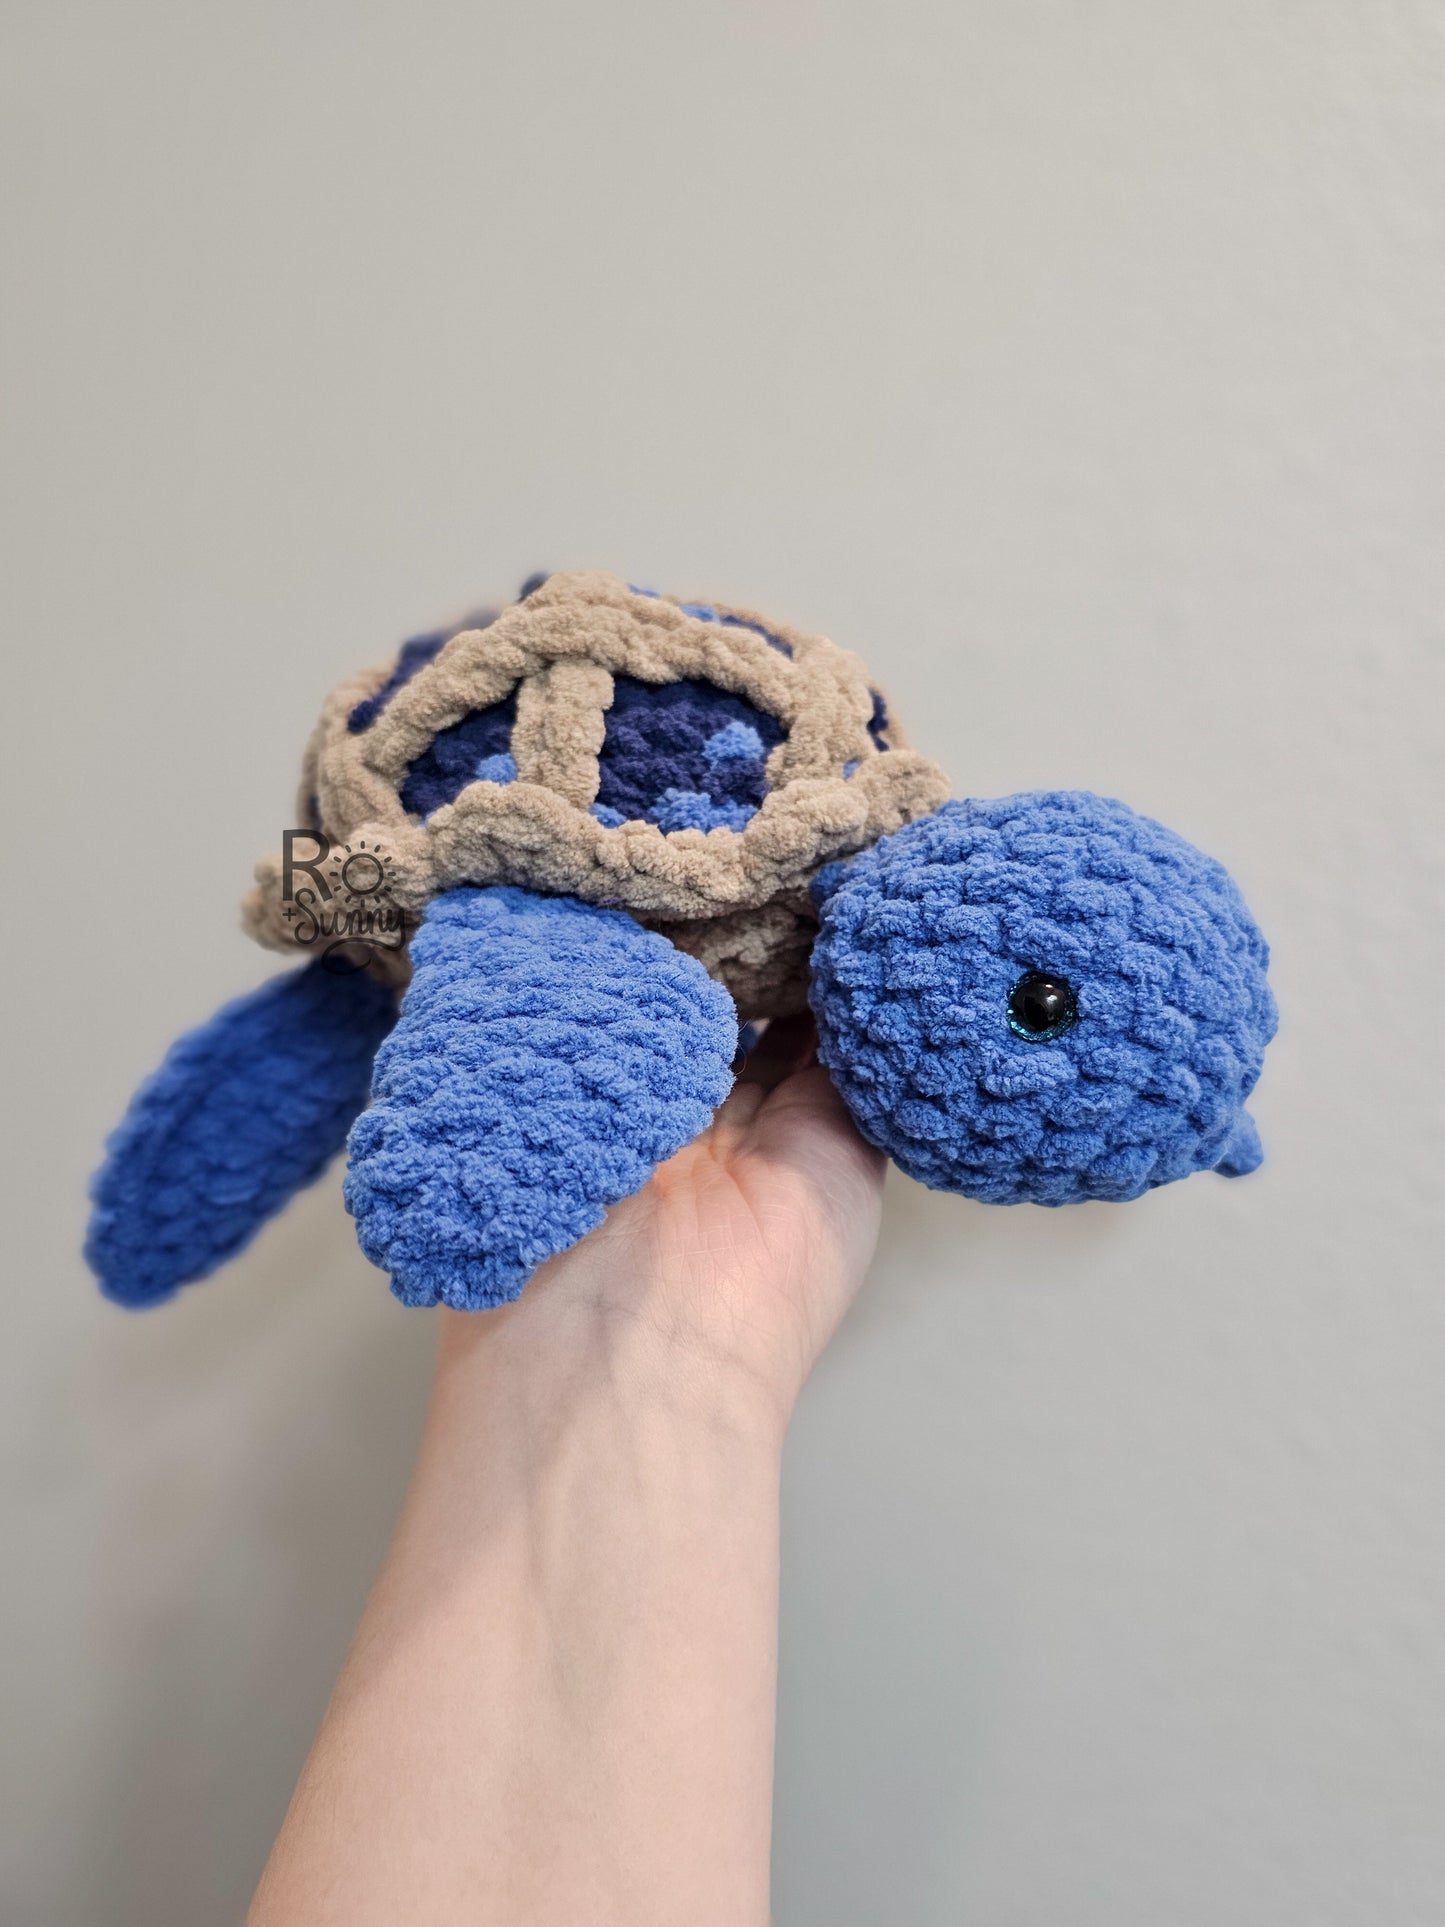 Blueberry Pie, Side Profile - Crochet sea turtle with a blue body and shell that looks like a lattice crusted blueberry pie.  Little blueberries are embroidered on the pie shell to add texture. 